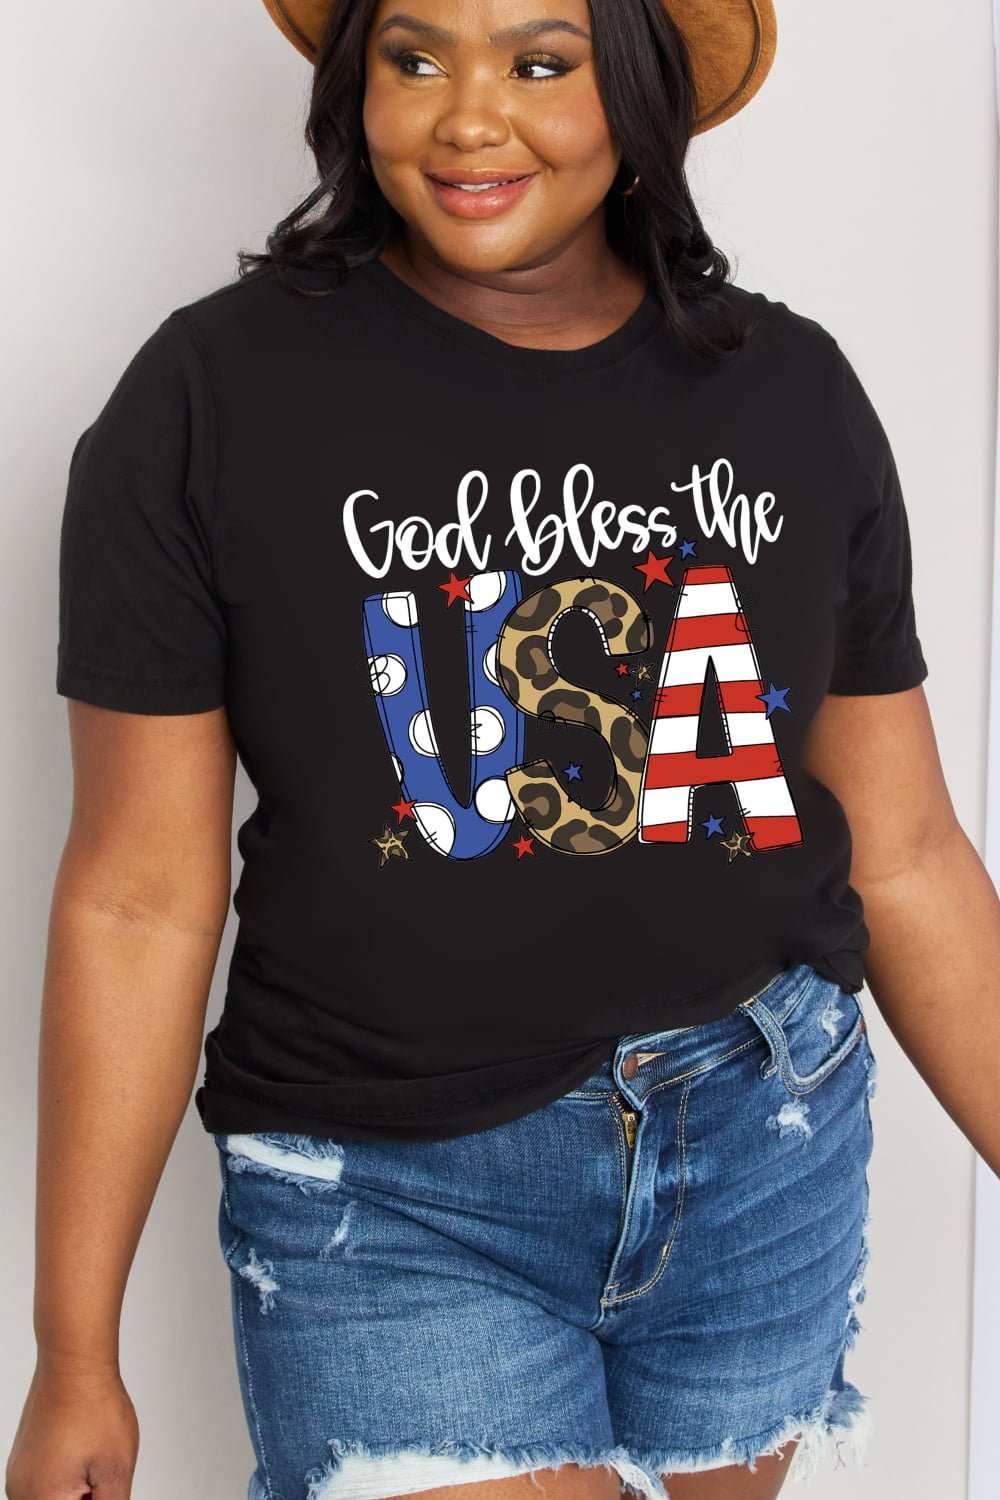 Simply Love Full Size GOD BLESS THE USA Graphic Cotton Tee - OMG! Rose